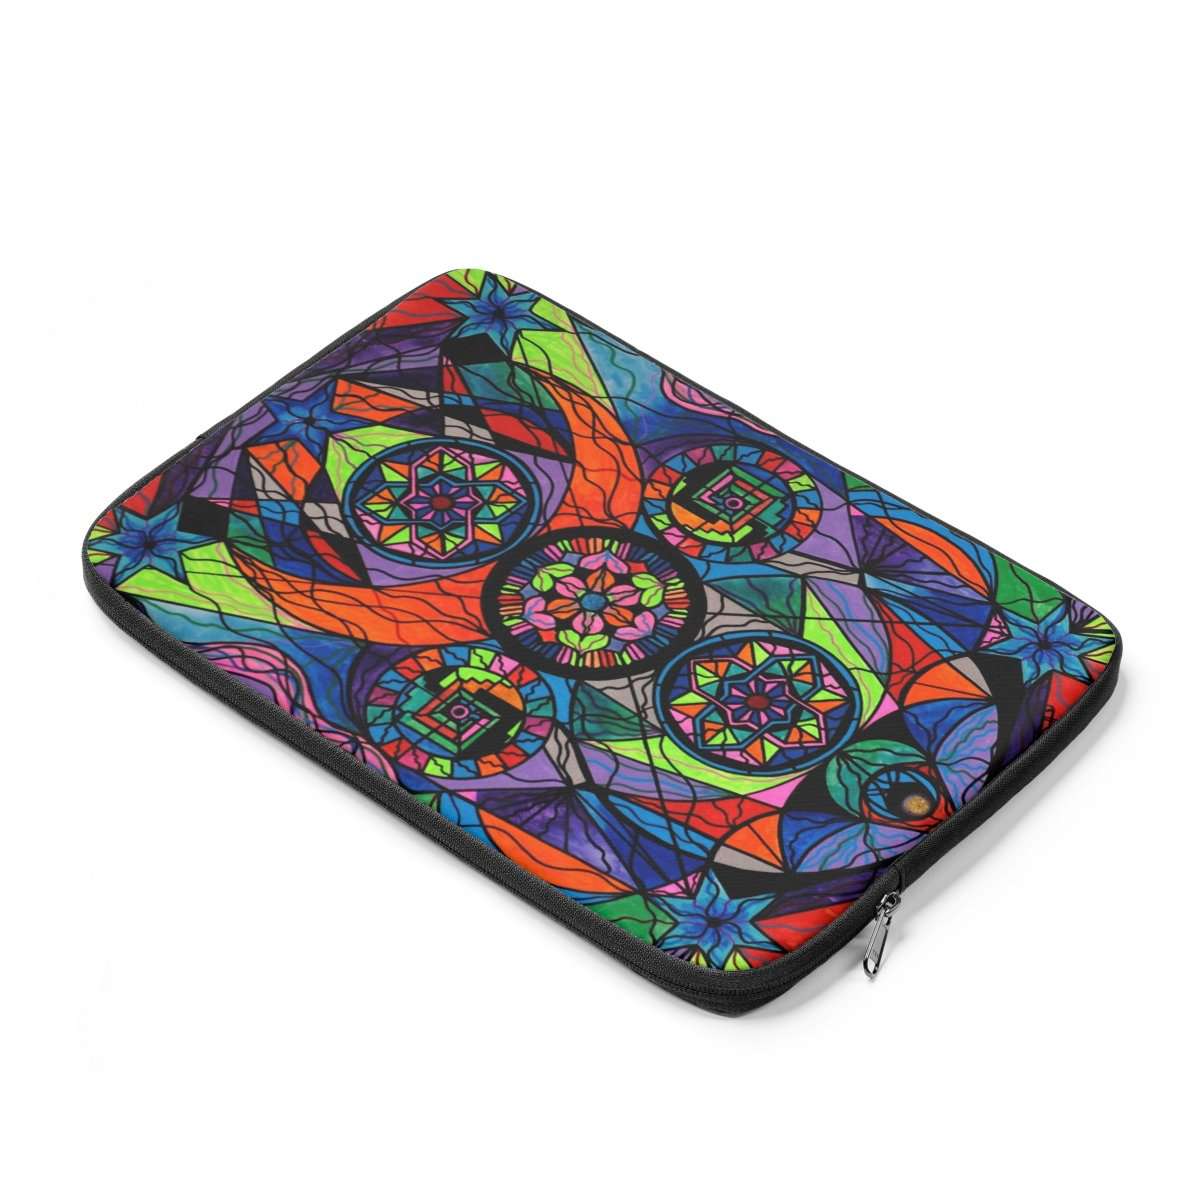 the-place-to-buy-higher-purpose-laptop-sleeve-online-sale_1.jpg